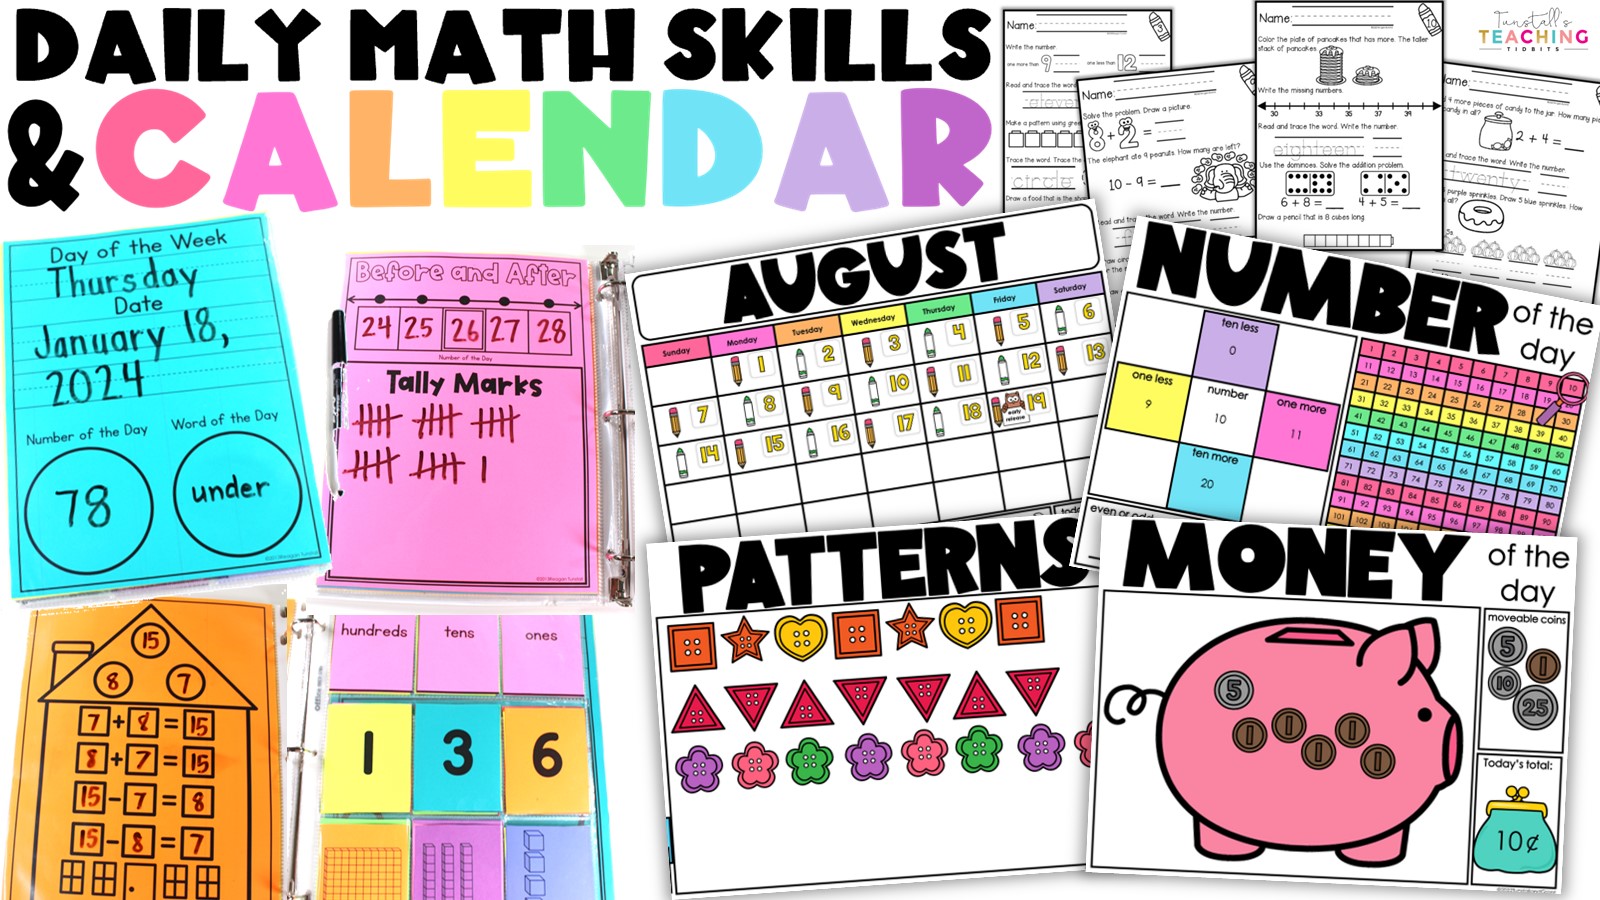 COUNTING THE DAYS: EXPLORING THE IMPORTANCE OF DAILY MATH SKILLS AND CALENDAR KNOWLEDGE